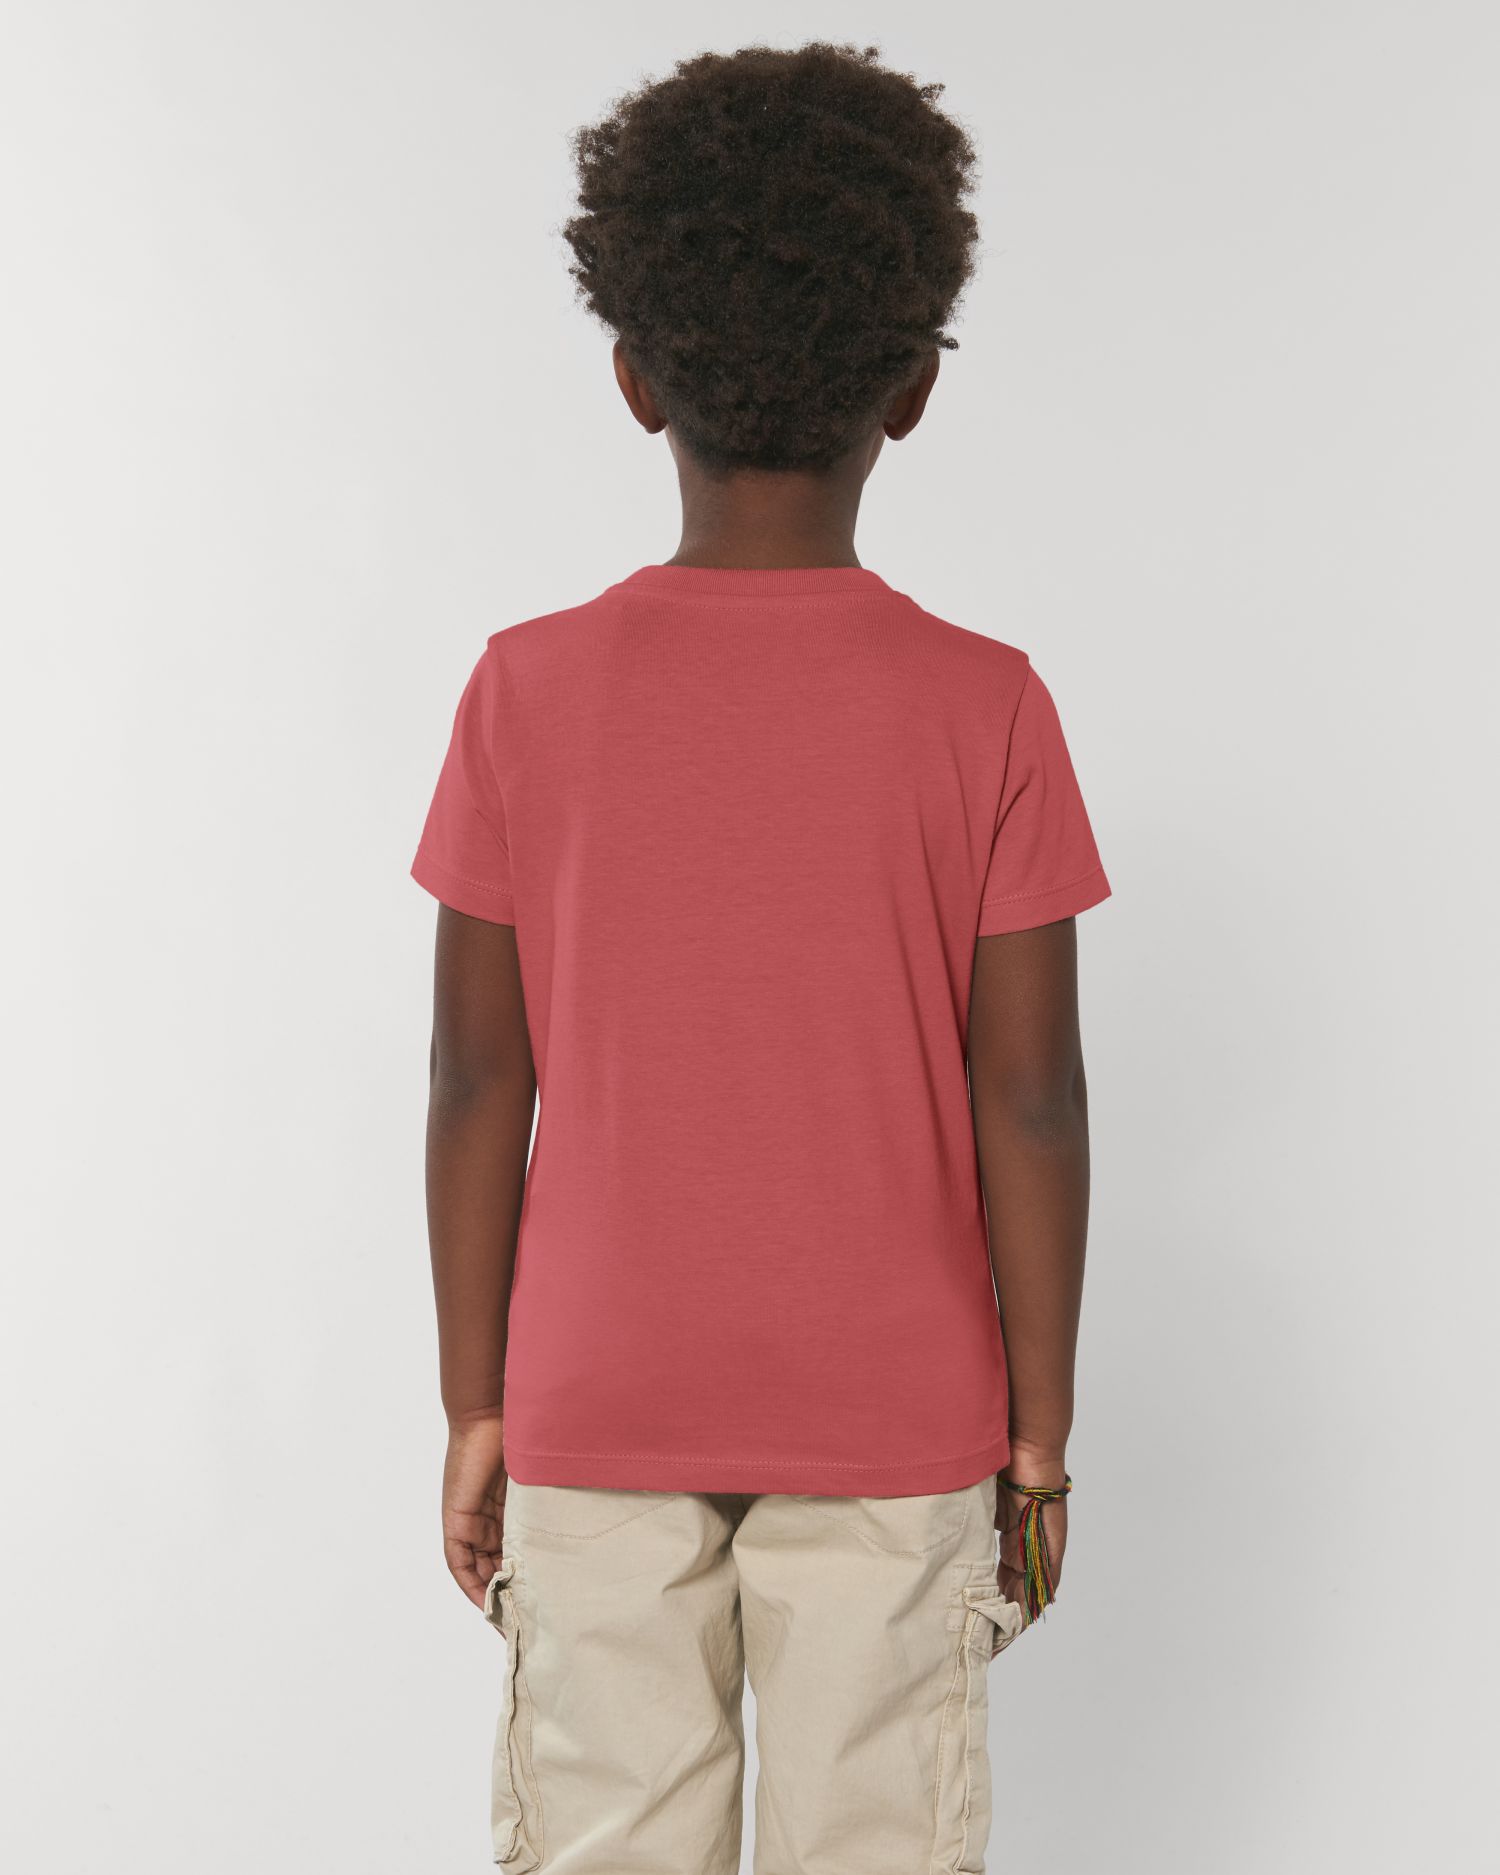 Be Famous Kids T-Shirt Carmine Red 12-14